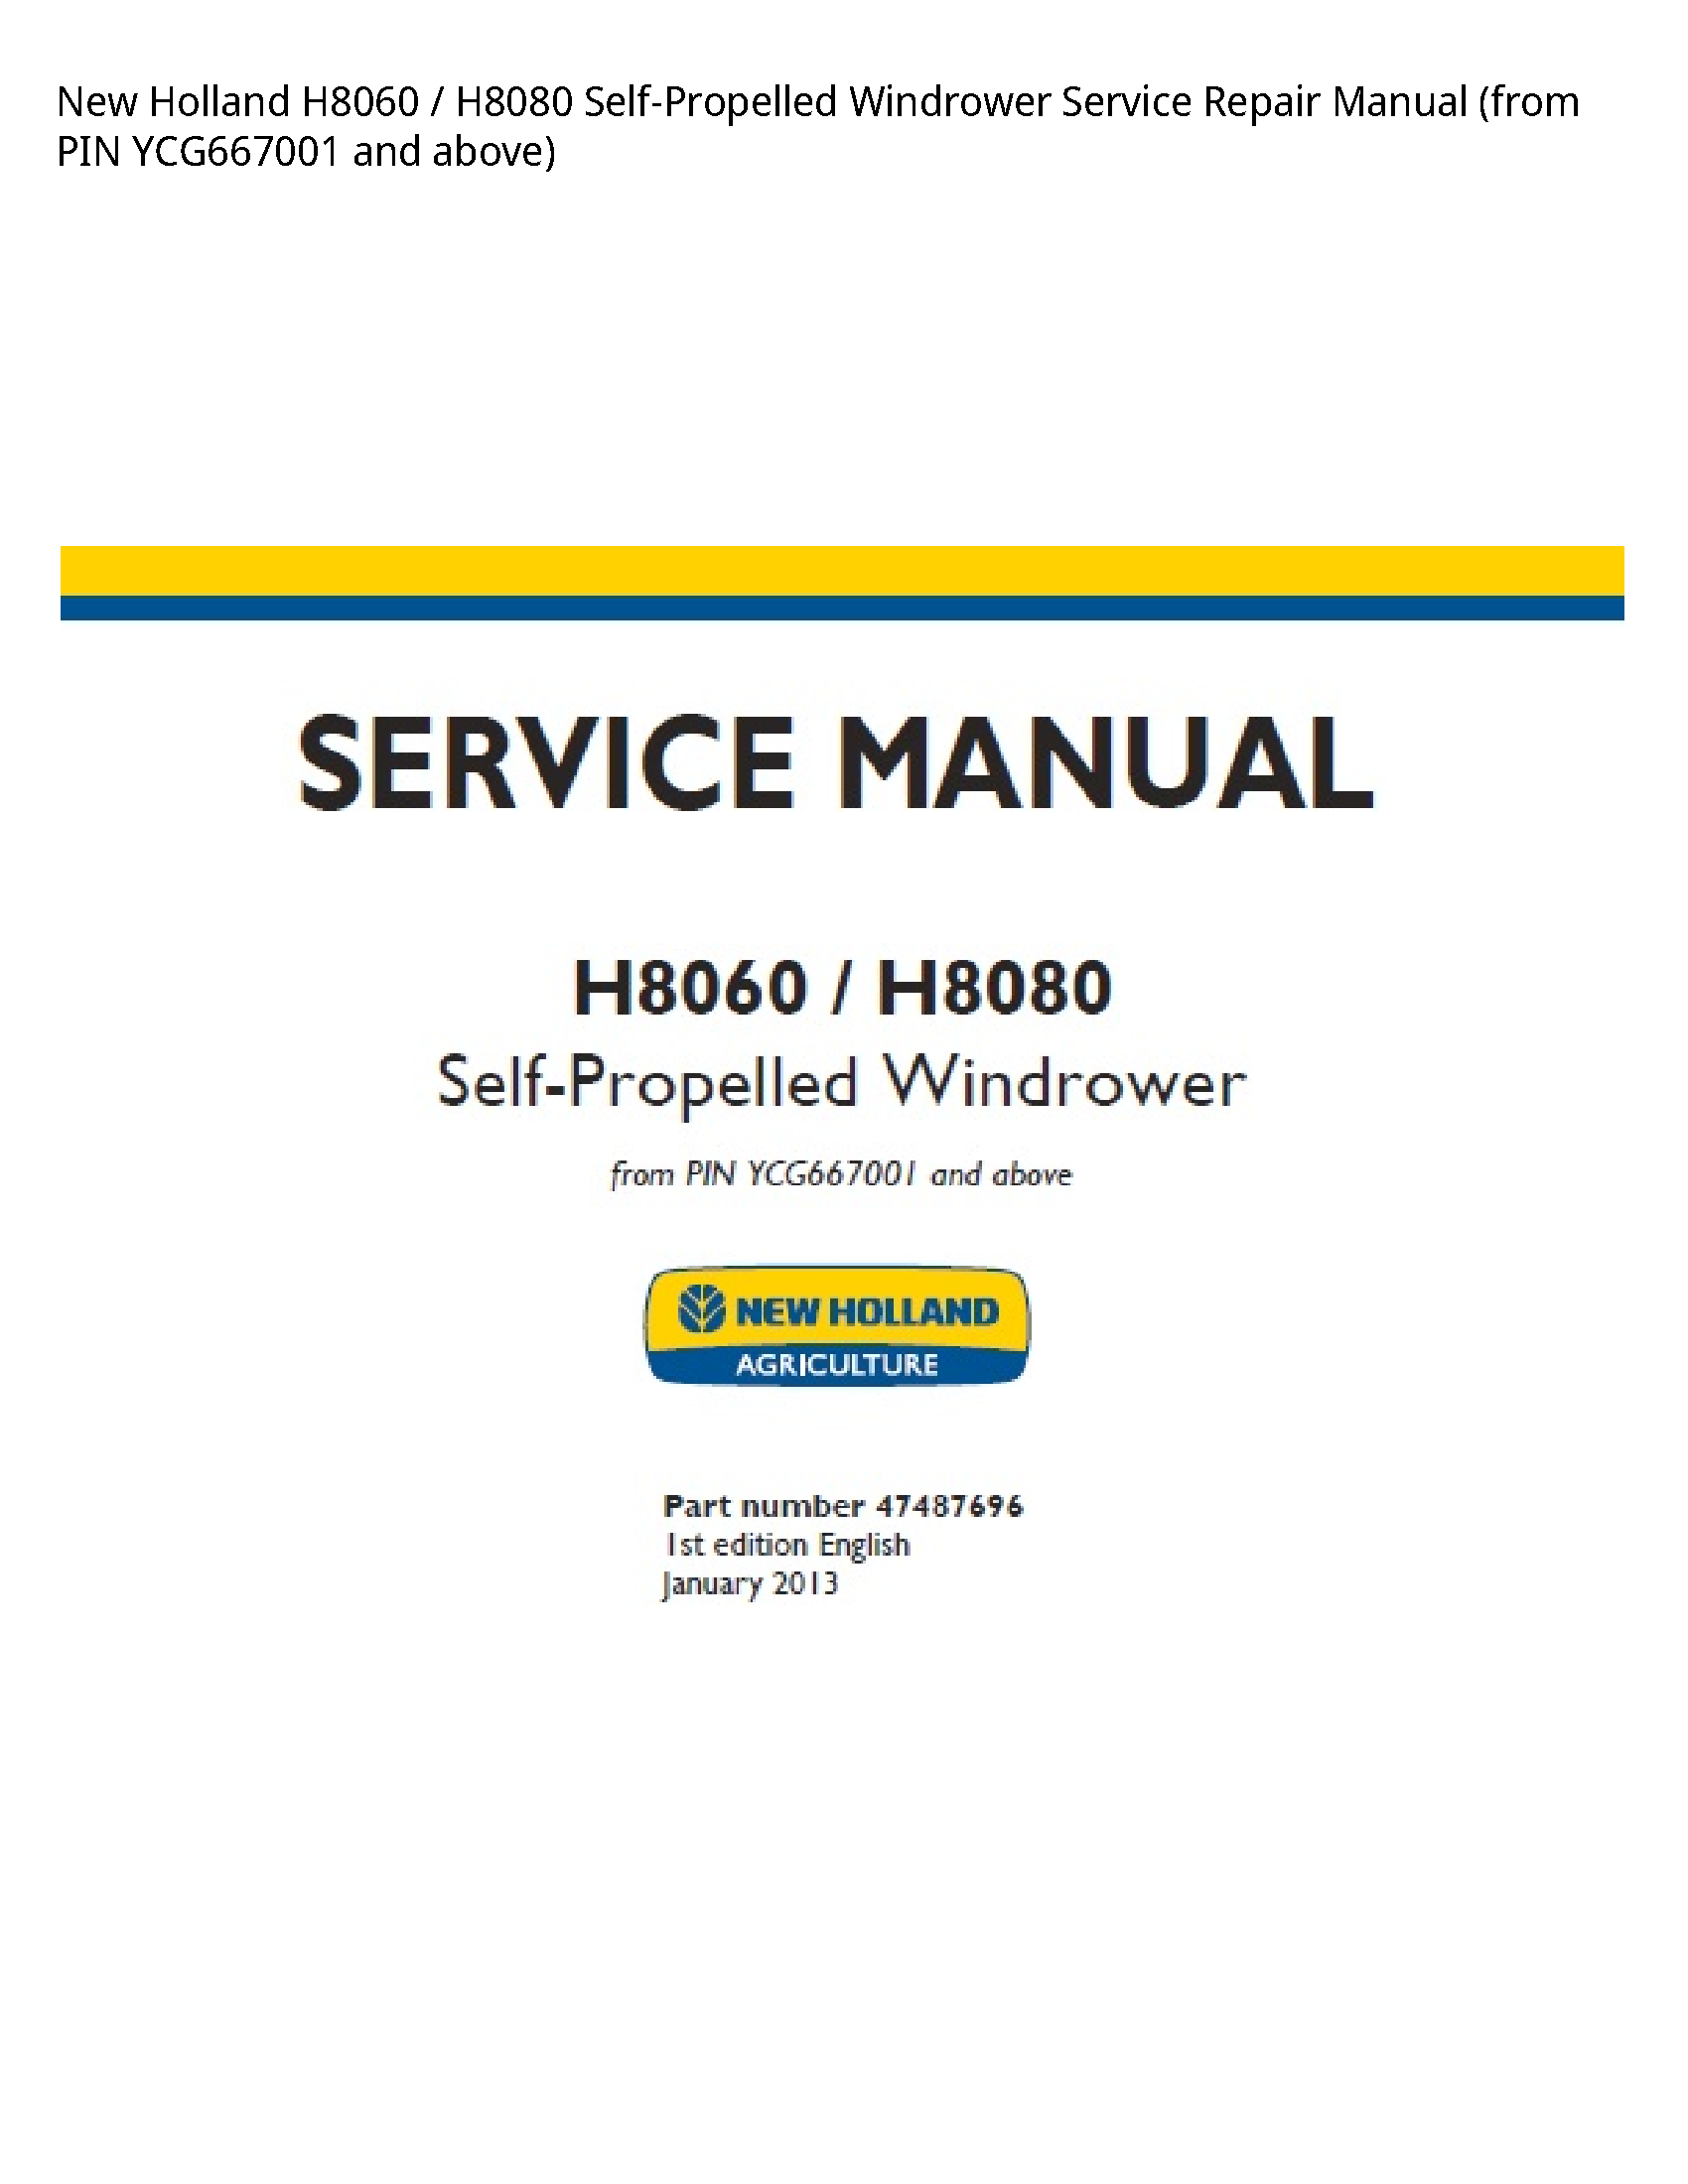 New Holland H8060 Self-Propelled Windrower manual